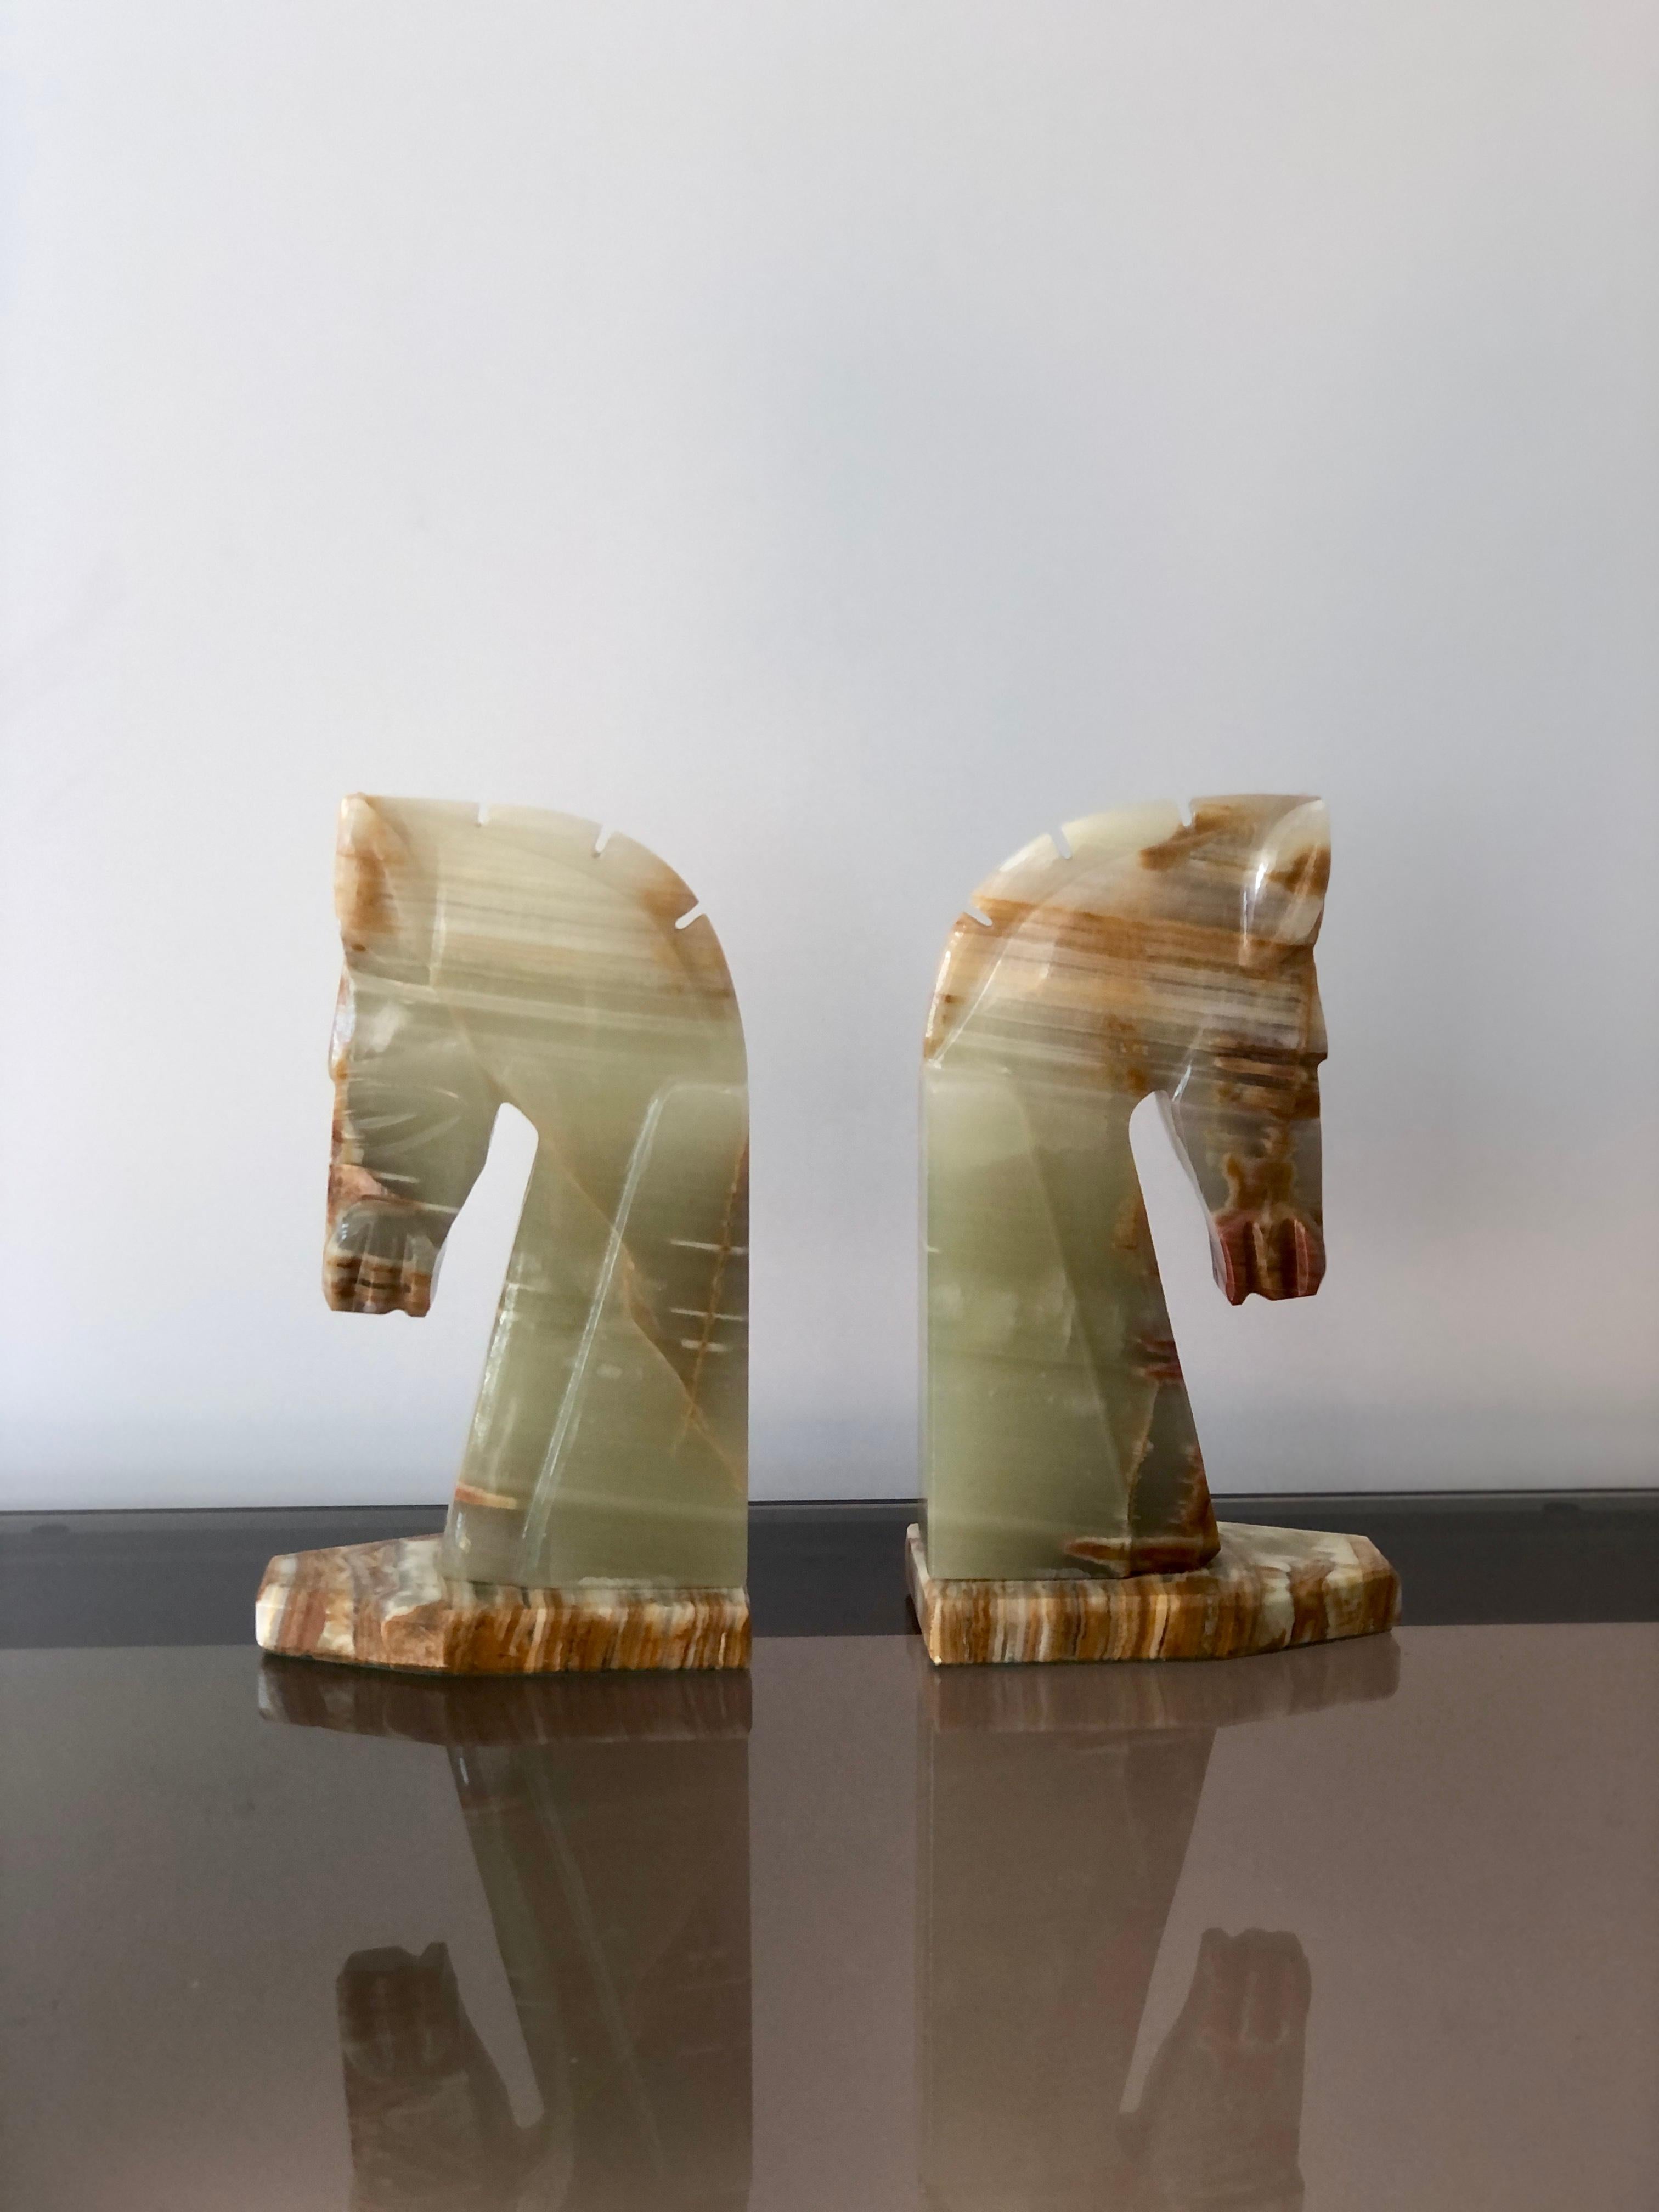 Pair of midcentury, circa 1970s, marble horse head bookends. well crafted with color honey cream and grey-green with amber and cream veined marble. Very stylish Etruscan horse profile bookends.